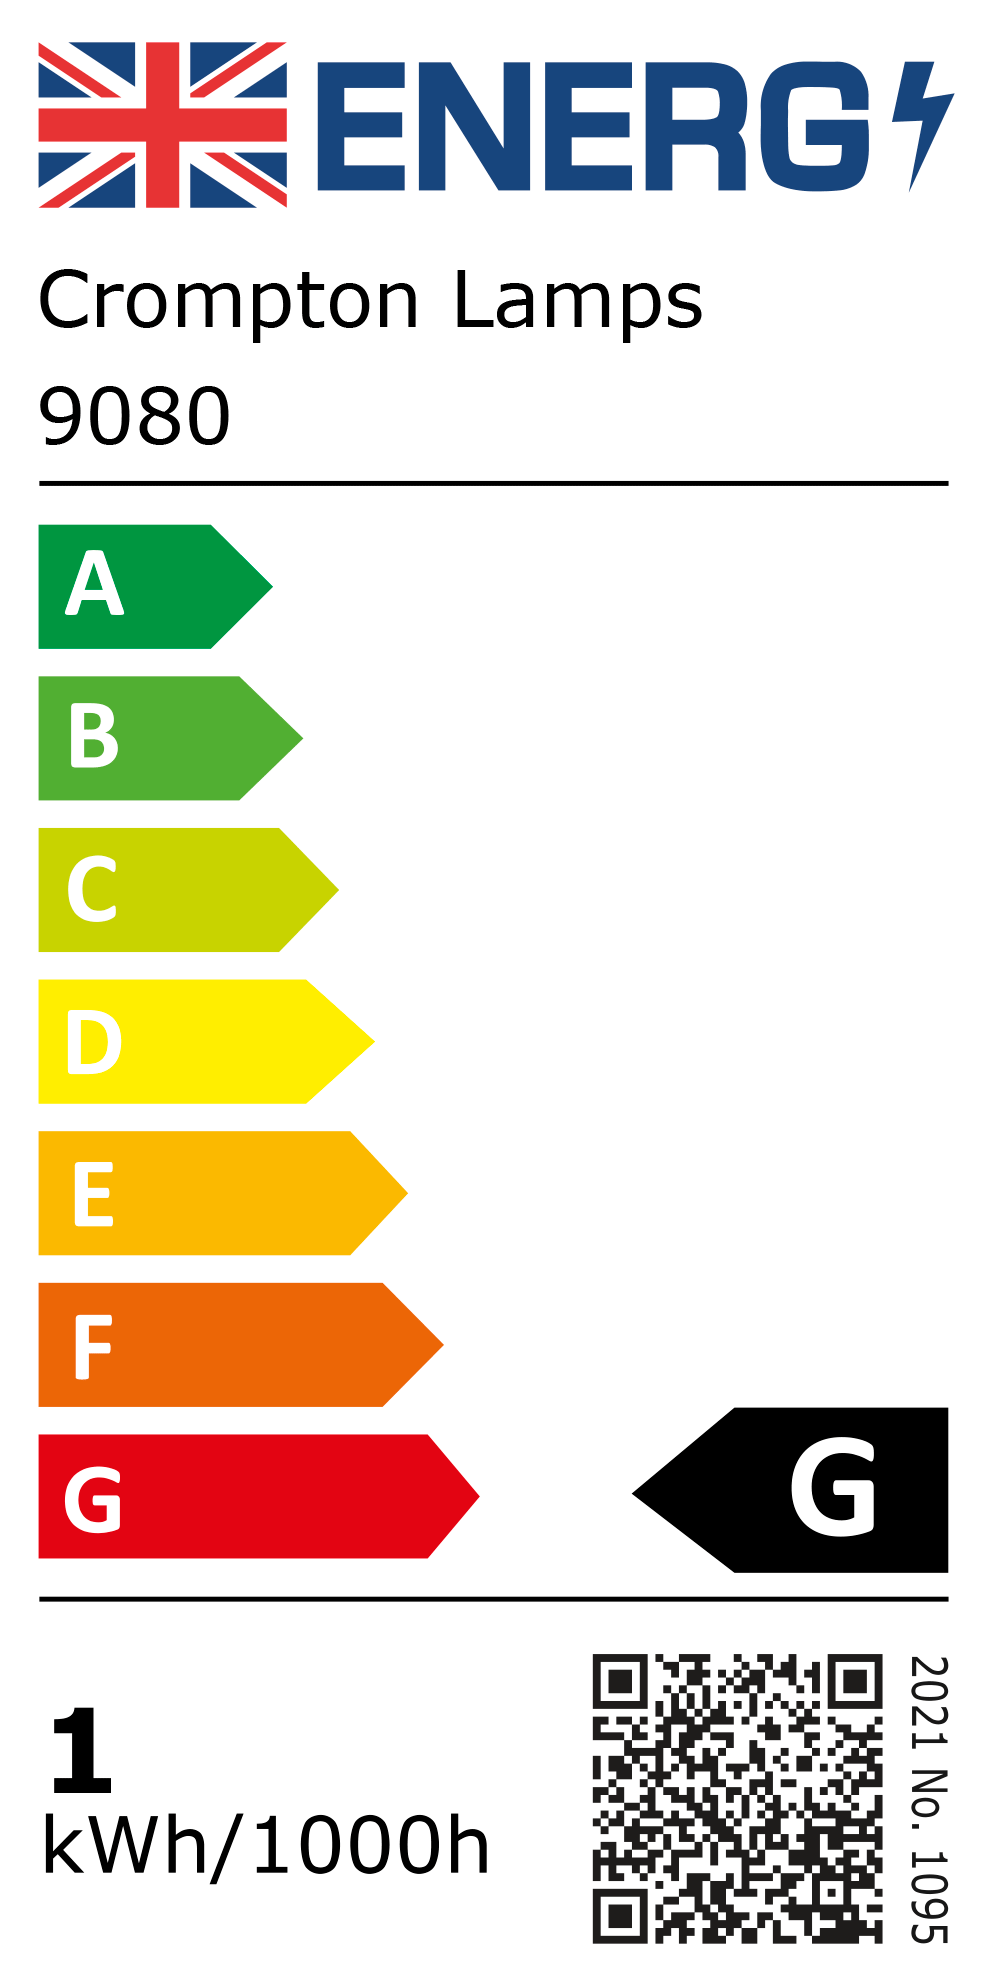 New 2021 Energy Rating Label: Stock Code 9080